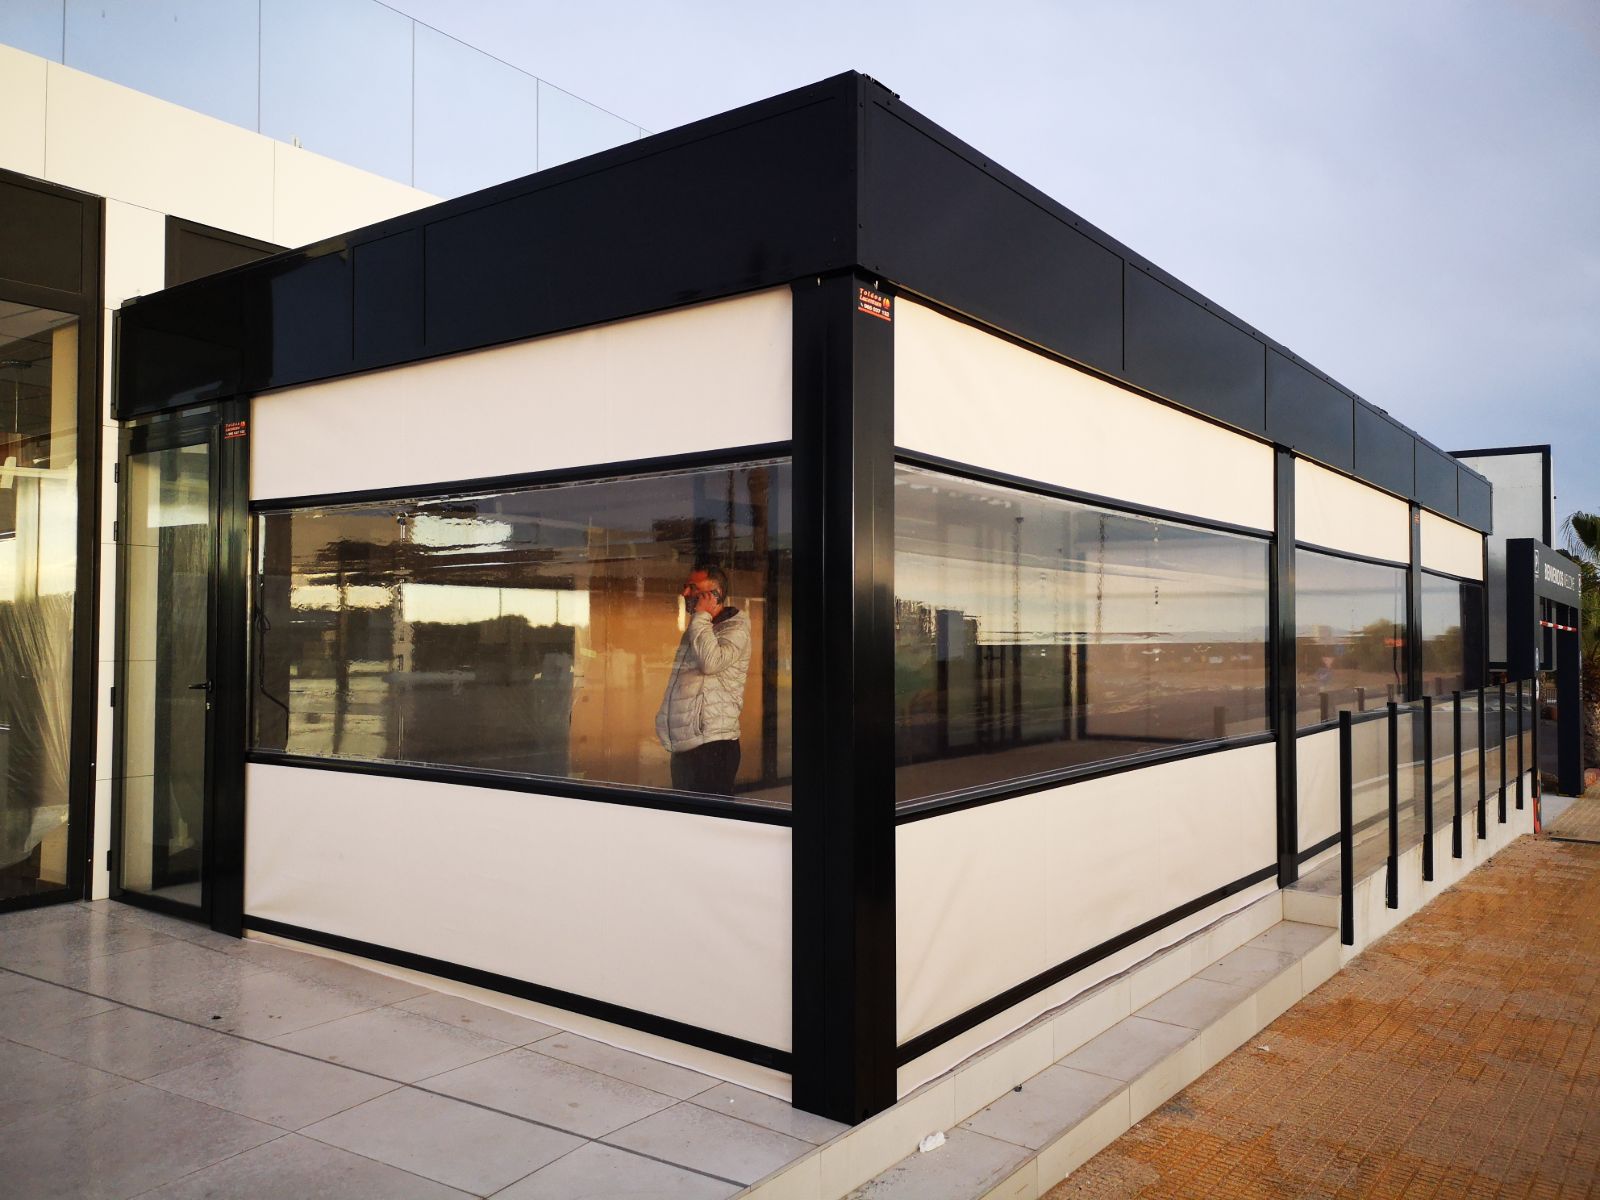 Enclosures with awnings